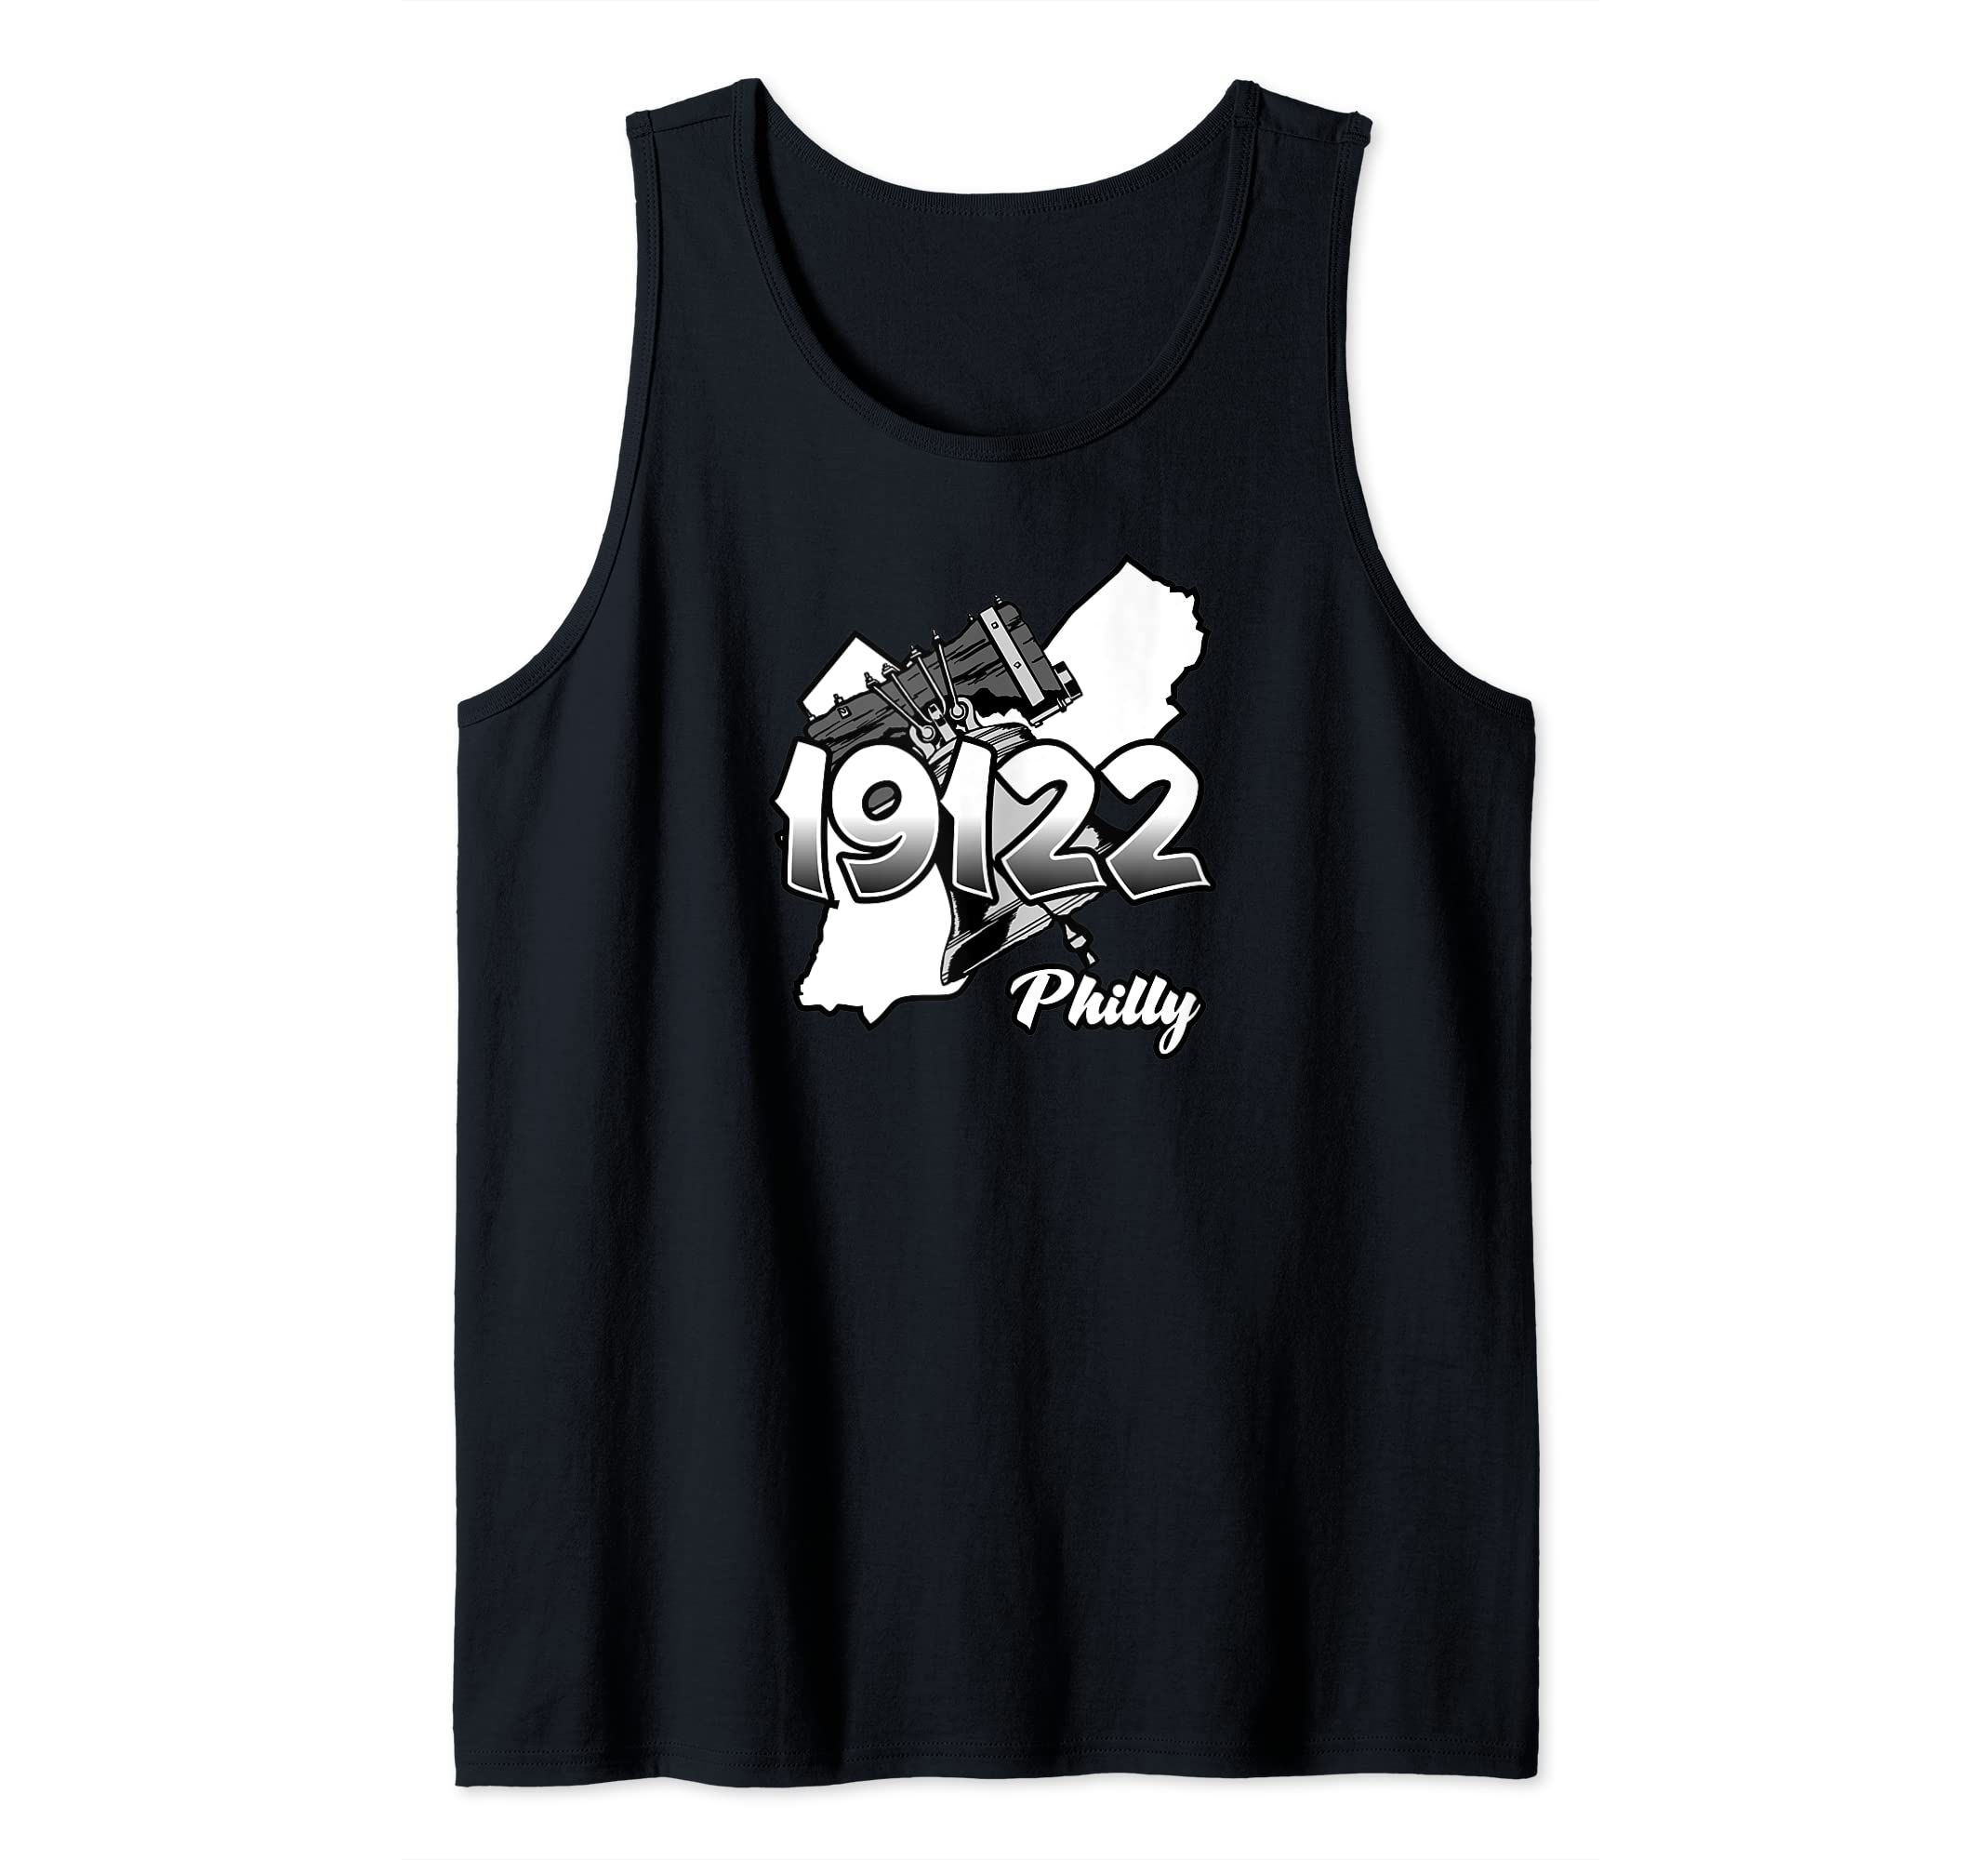 Philadelphia Silhouette with Zip Code 19122 and Liberty Bell Tank Top